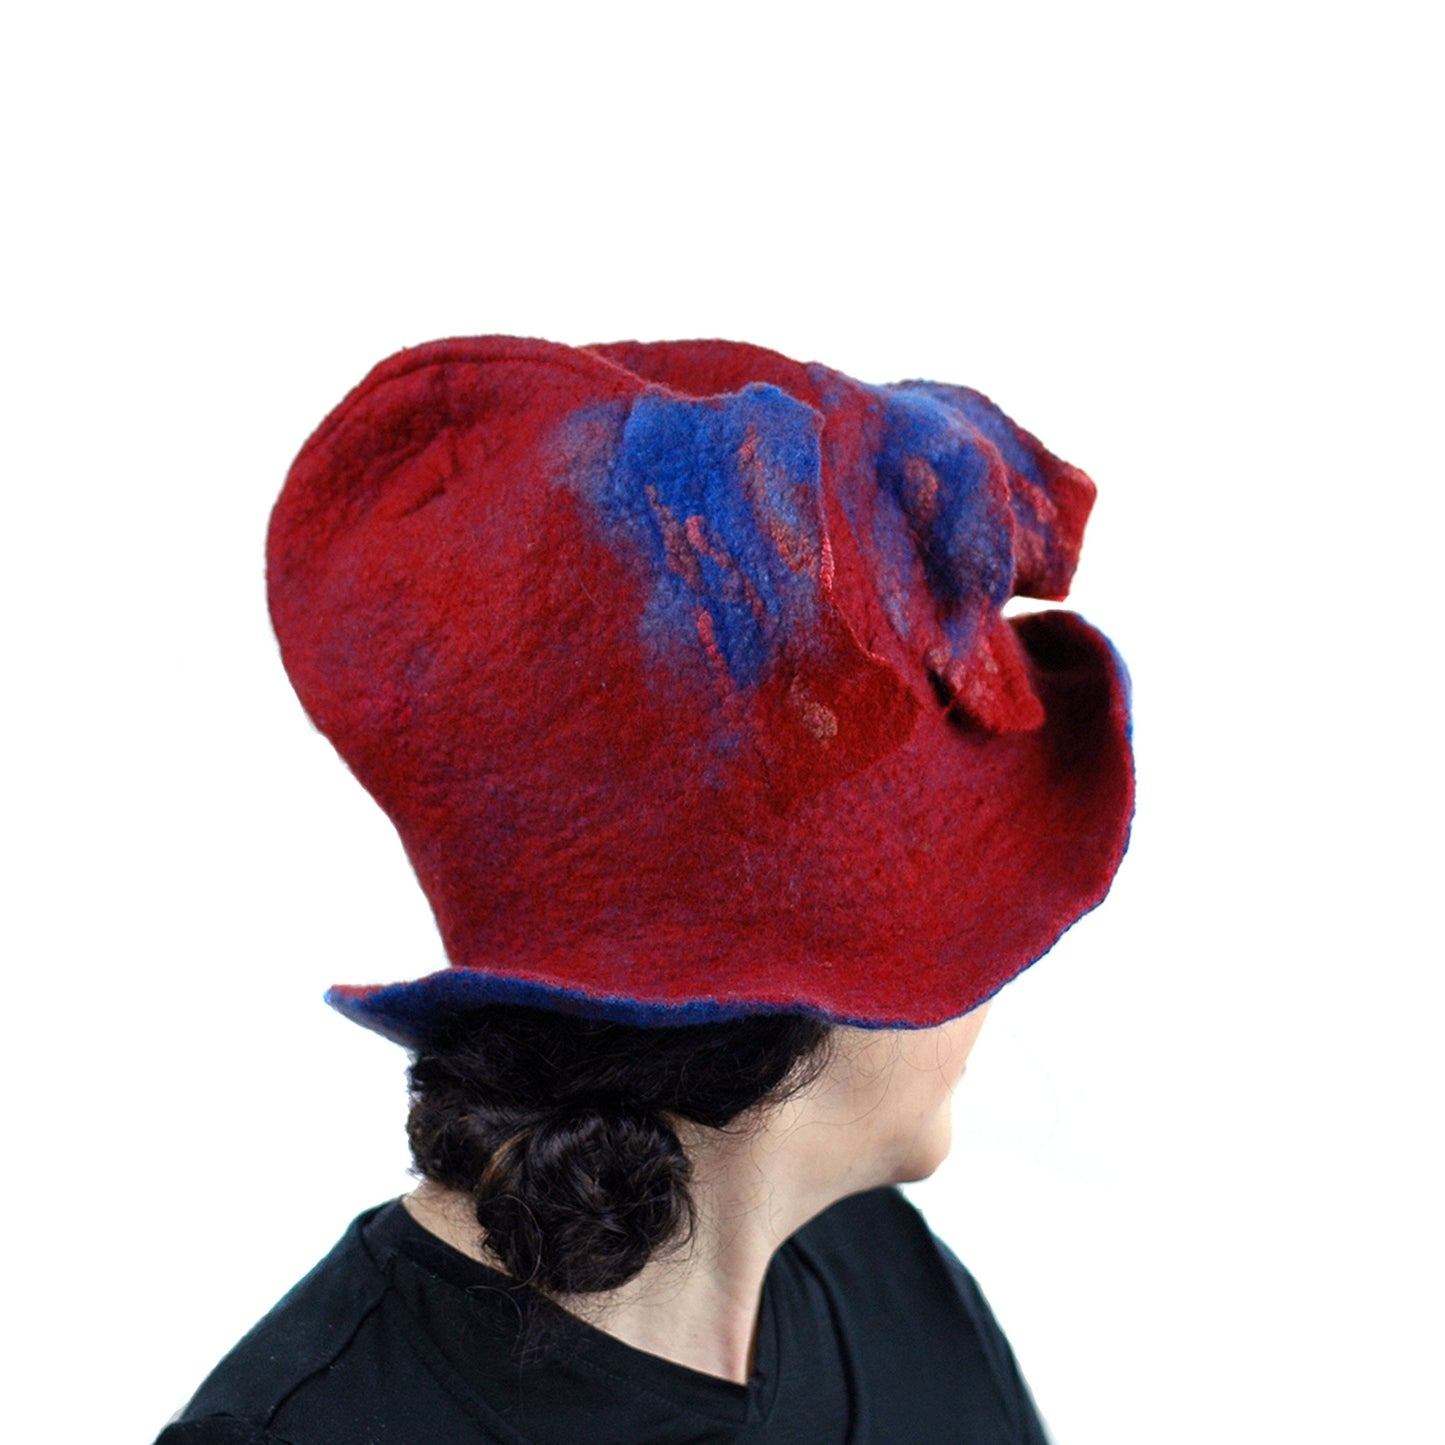 Big Brimmed Red and Blue Felted Hat - back view